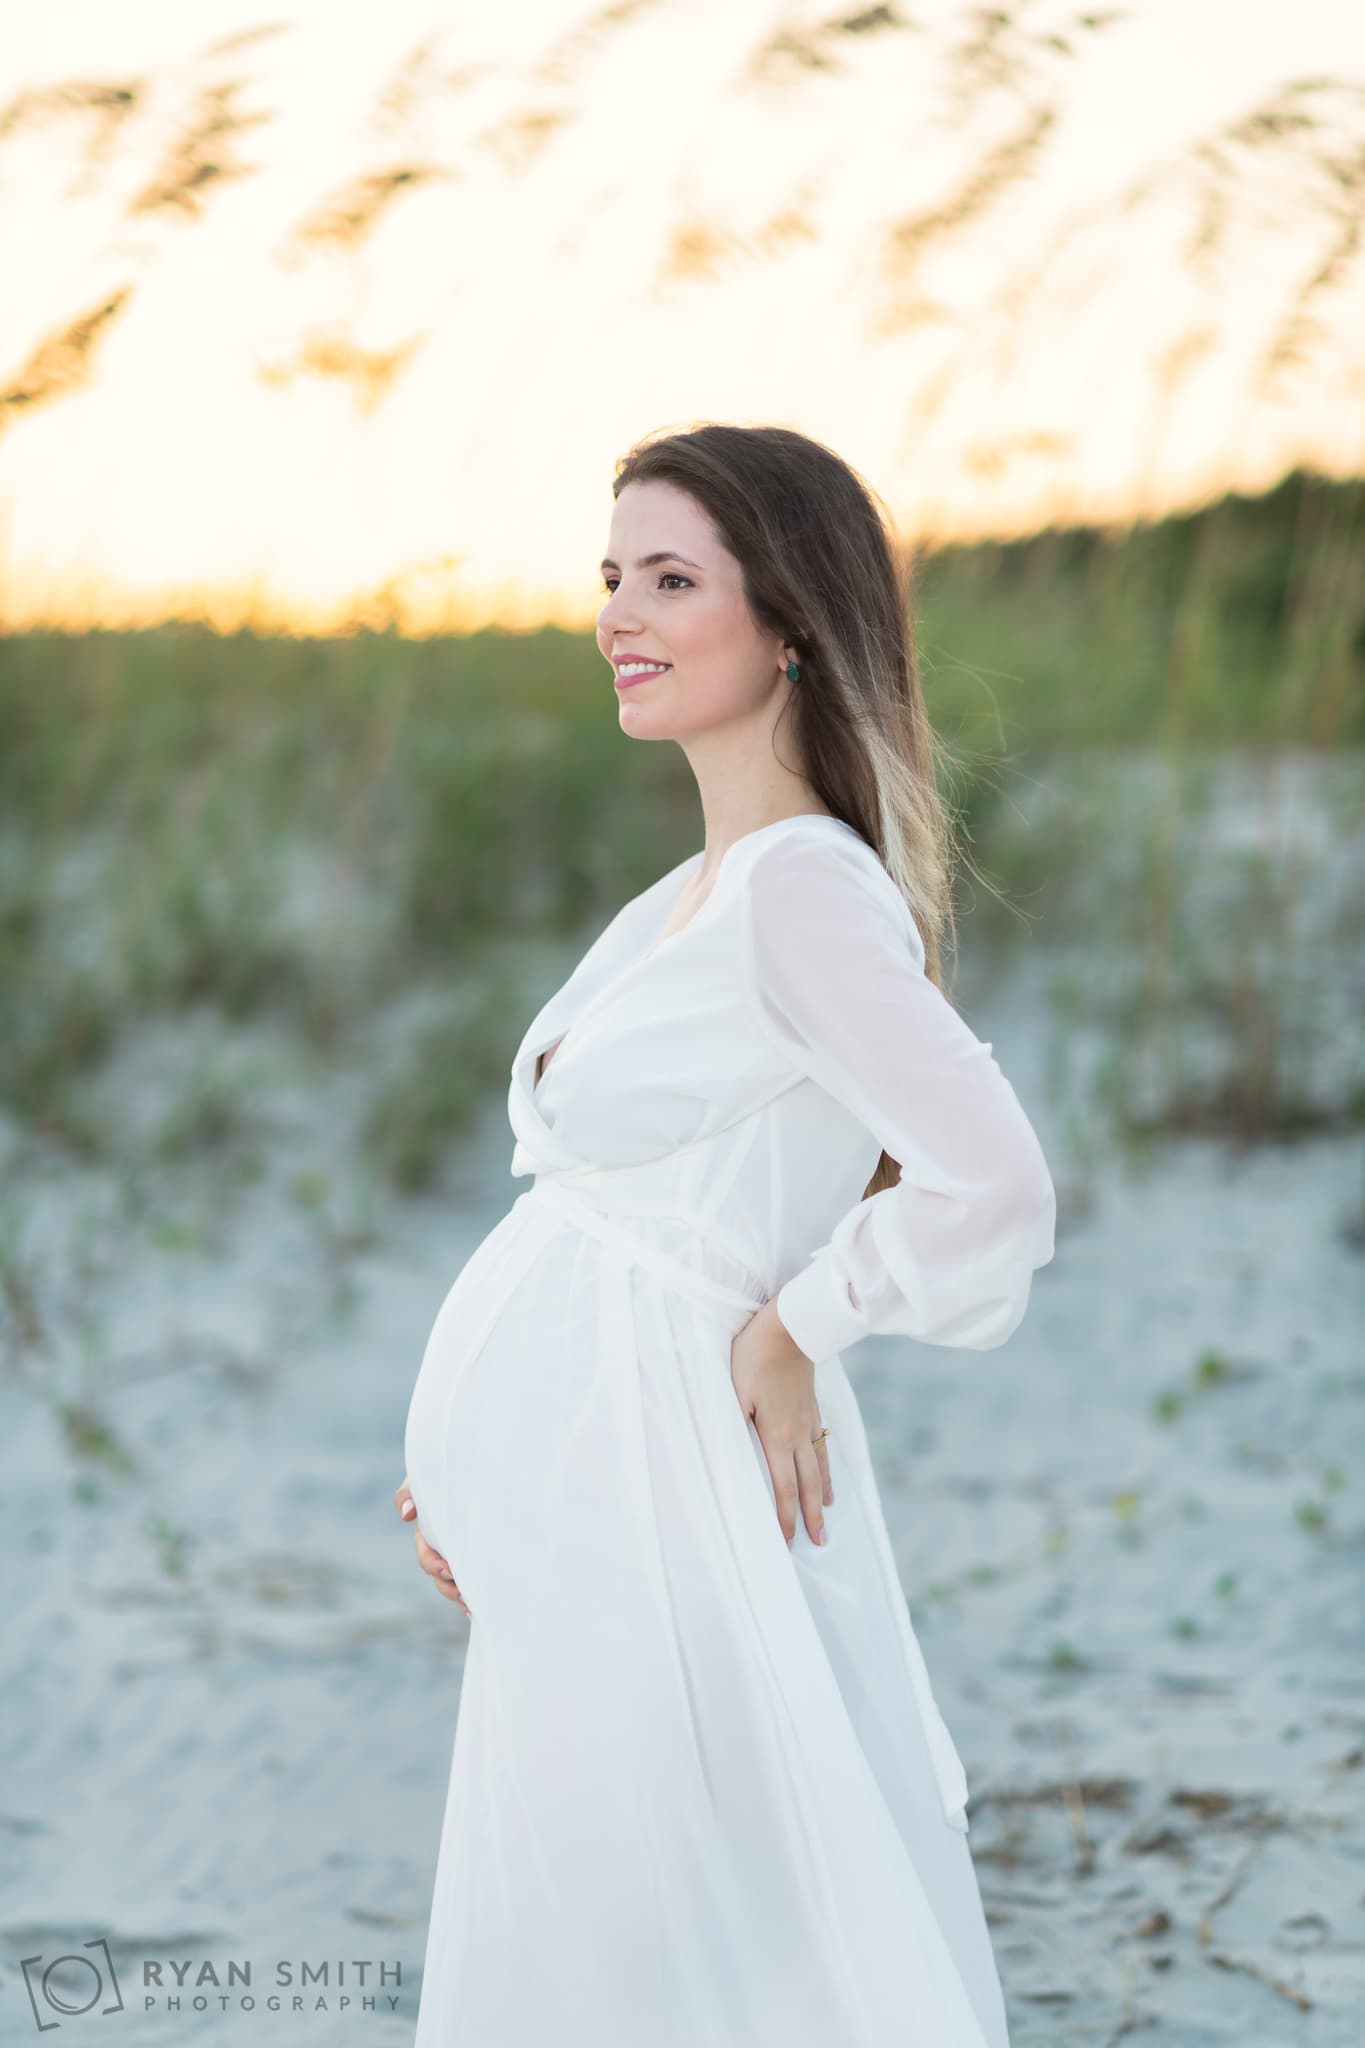 Sunset maternity portraits in Myrtle Beach